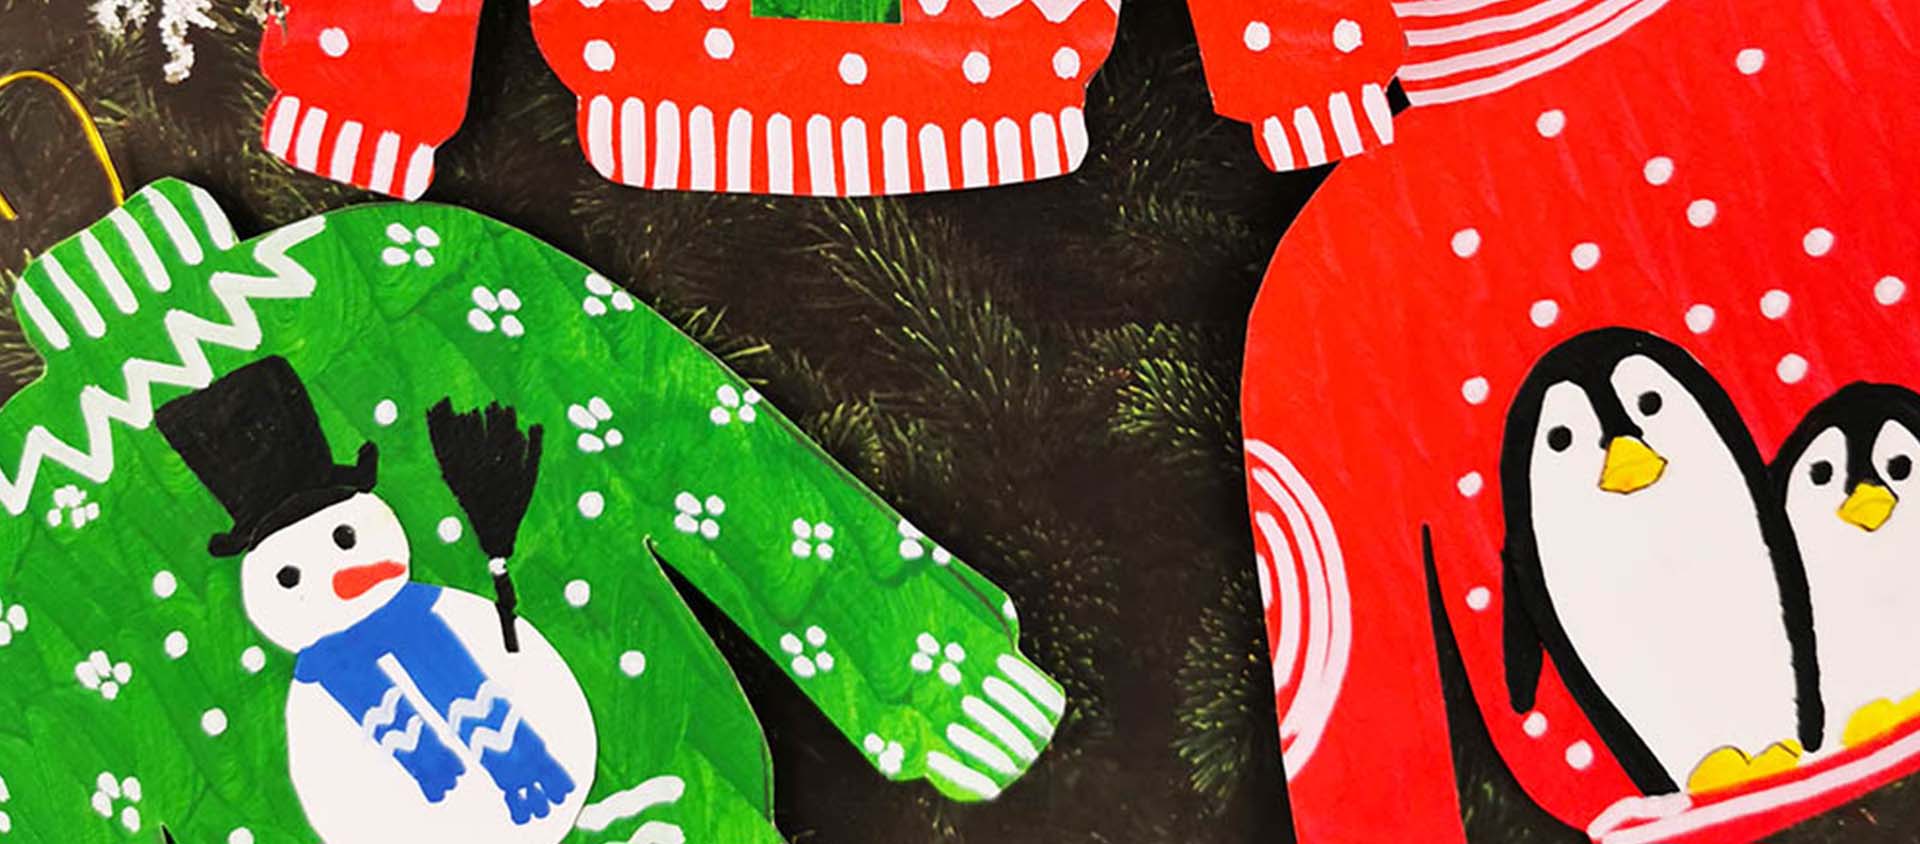 Learn how to paint christmas jumpers with Simply Gouache Paint by using this step-by-step guide created by Daler-Rowney artist Amylee Paris, and is easy for beginners to follow and explore using gouache paint!